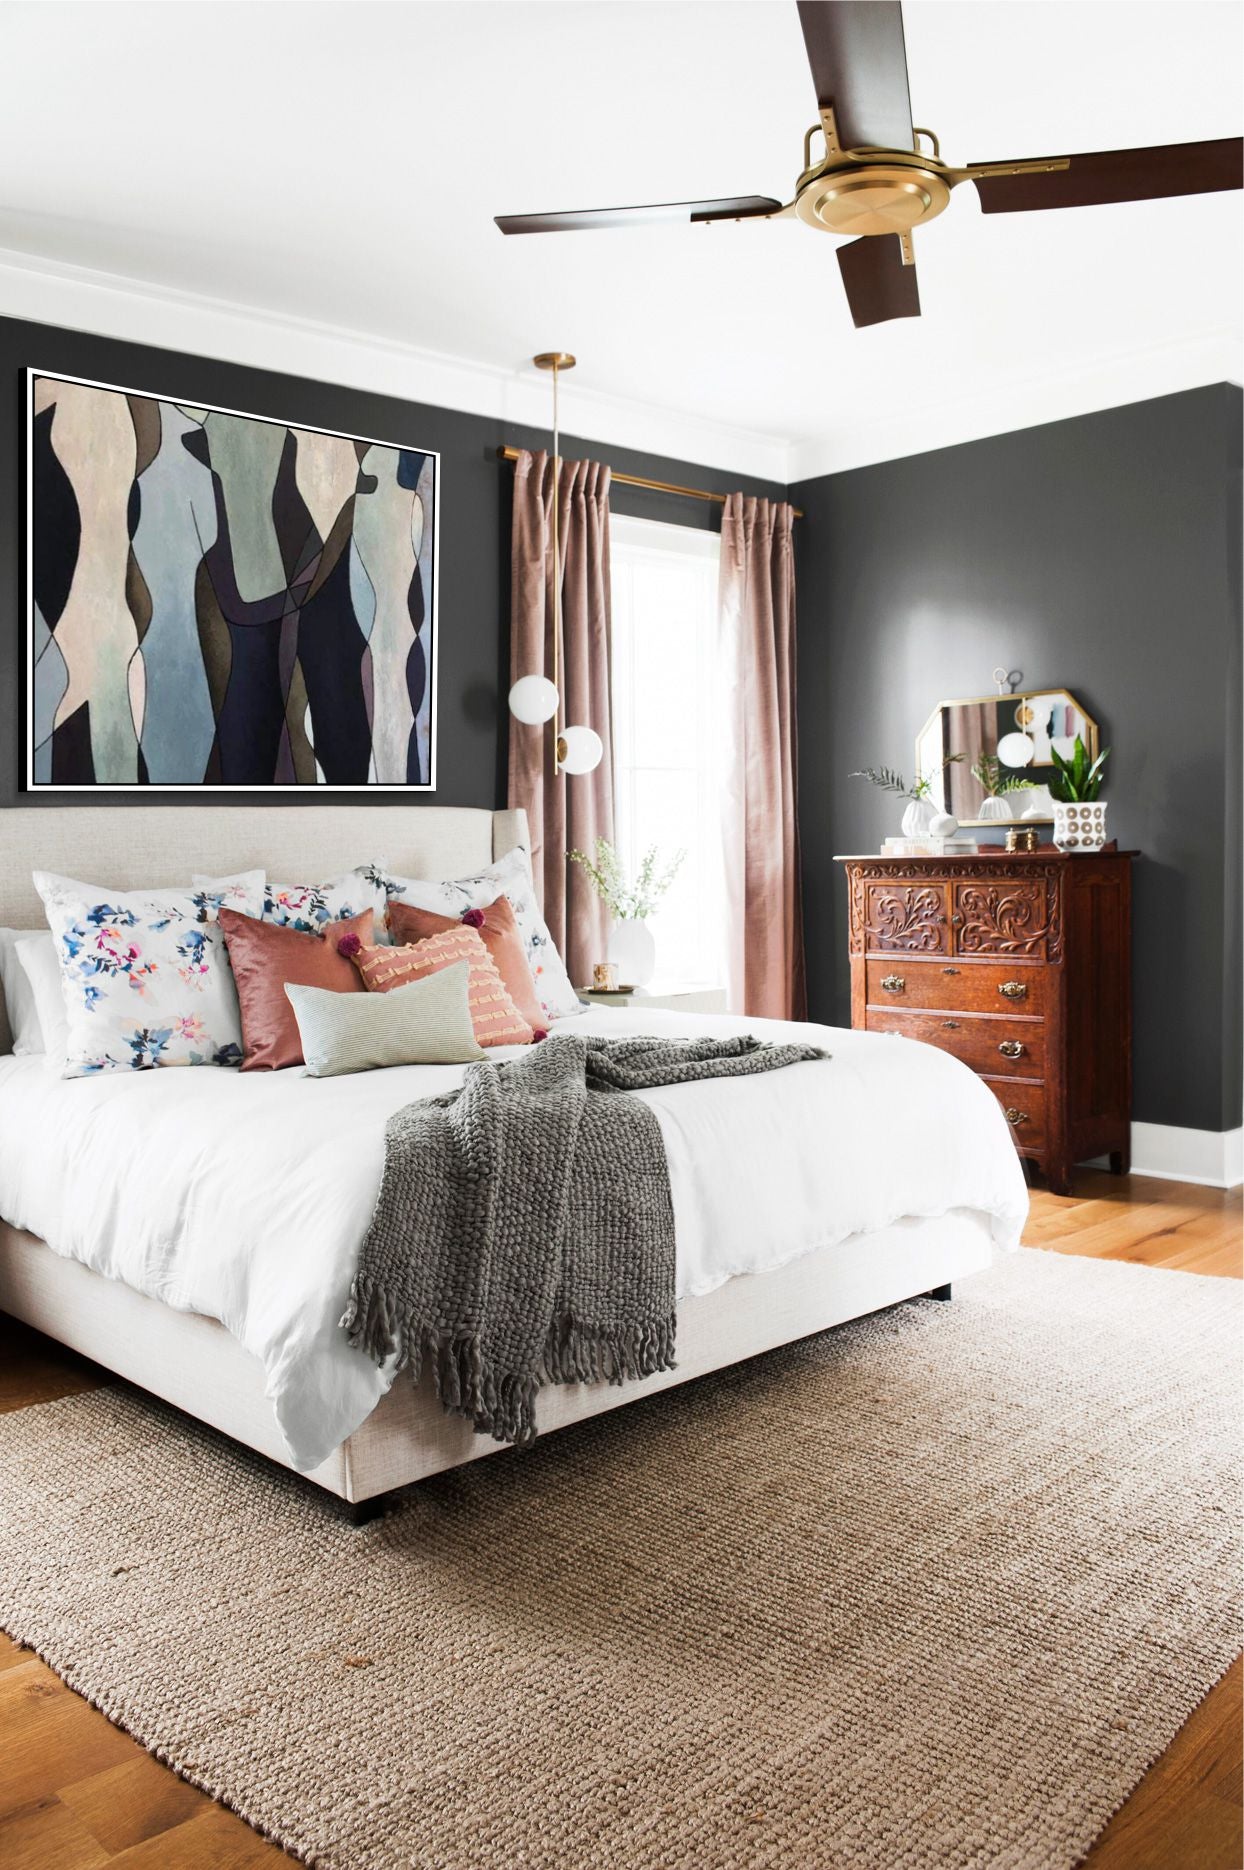 What Paintings Are The Best to Have In a Master Bedroom In Feng Shui? slider2-image-2